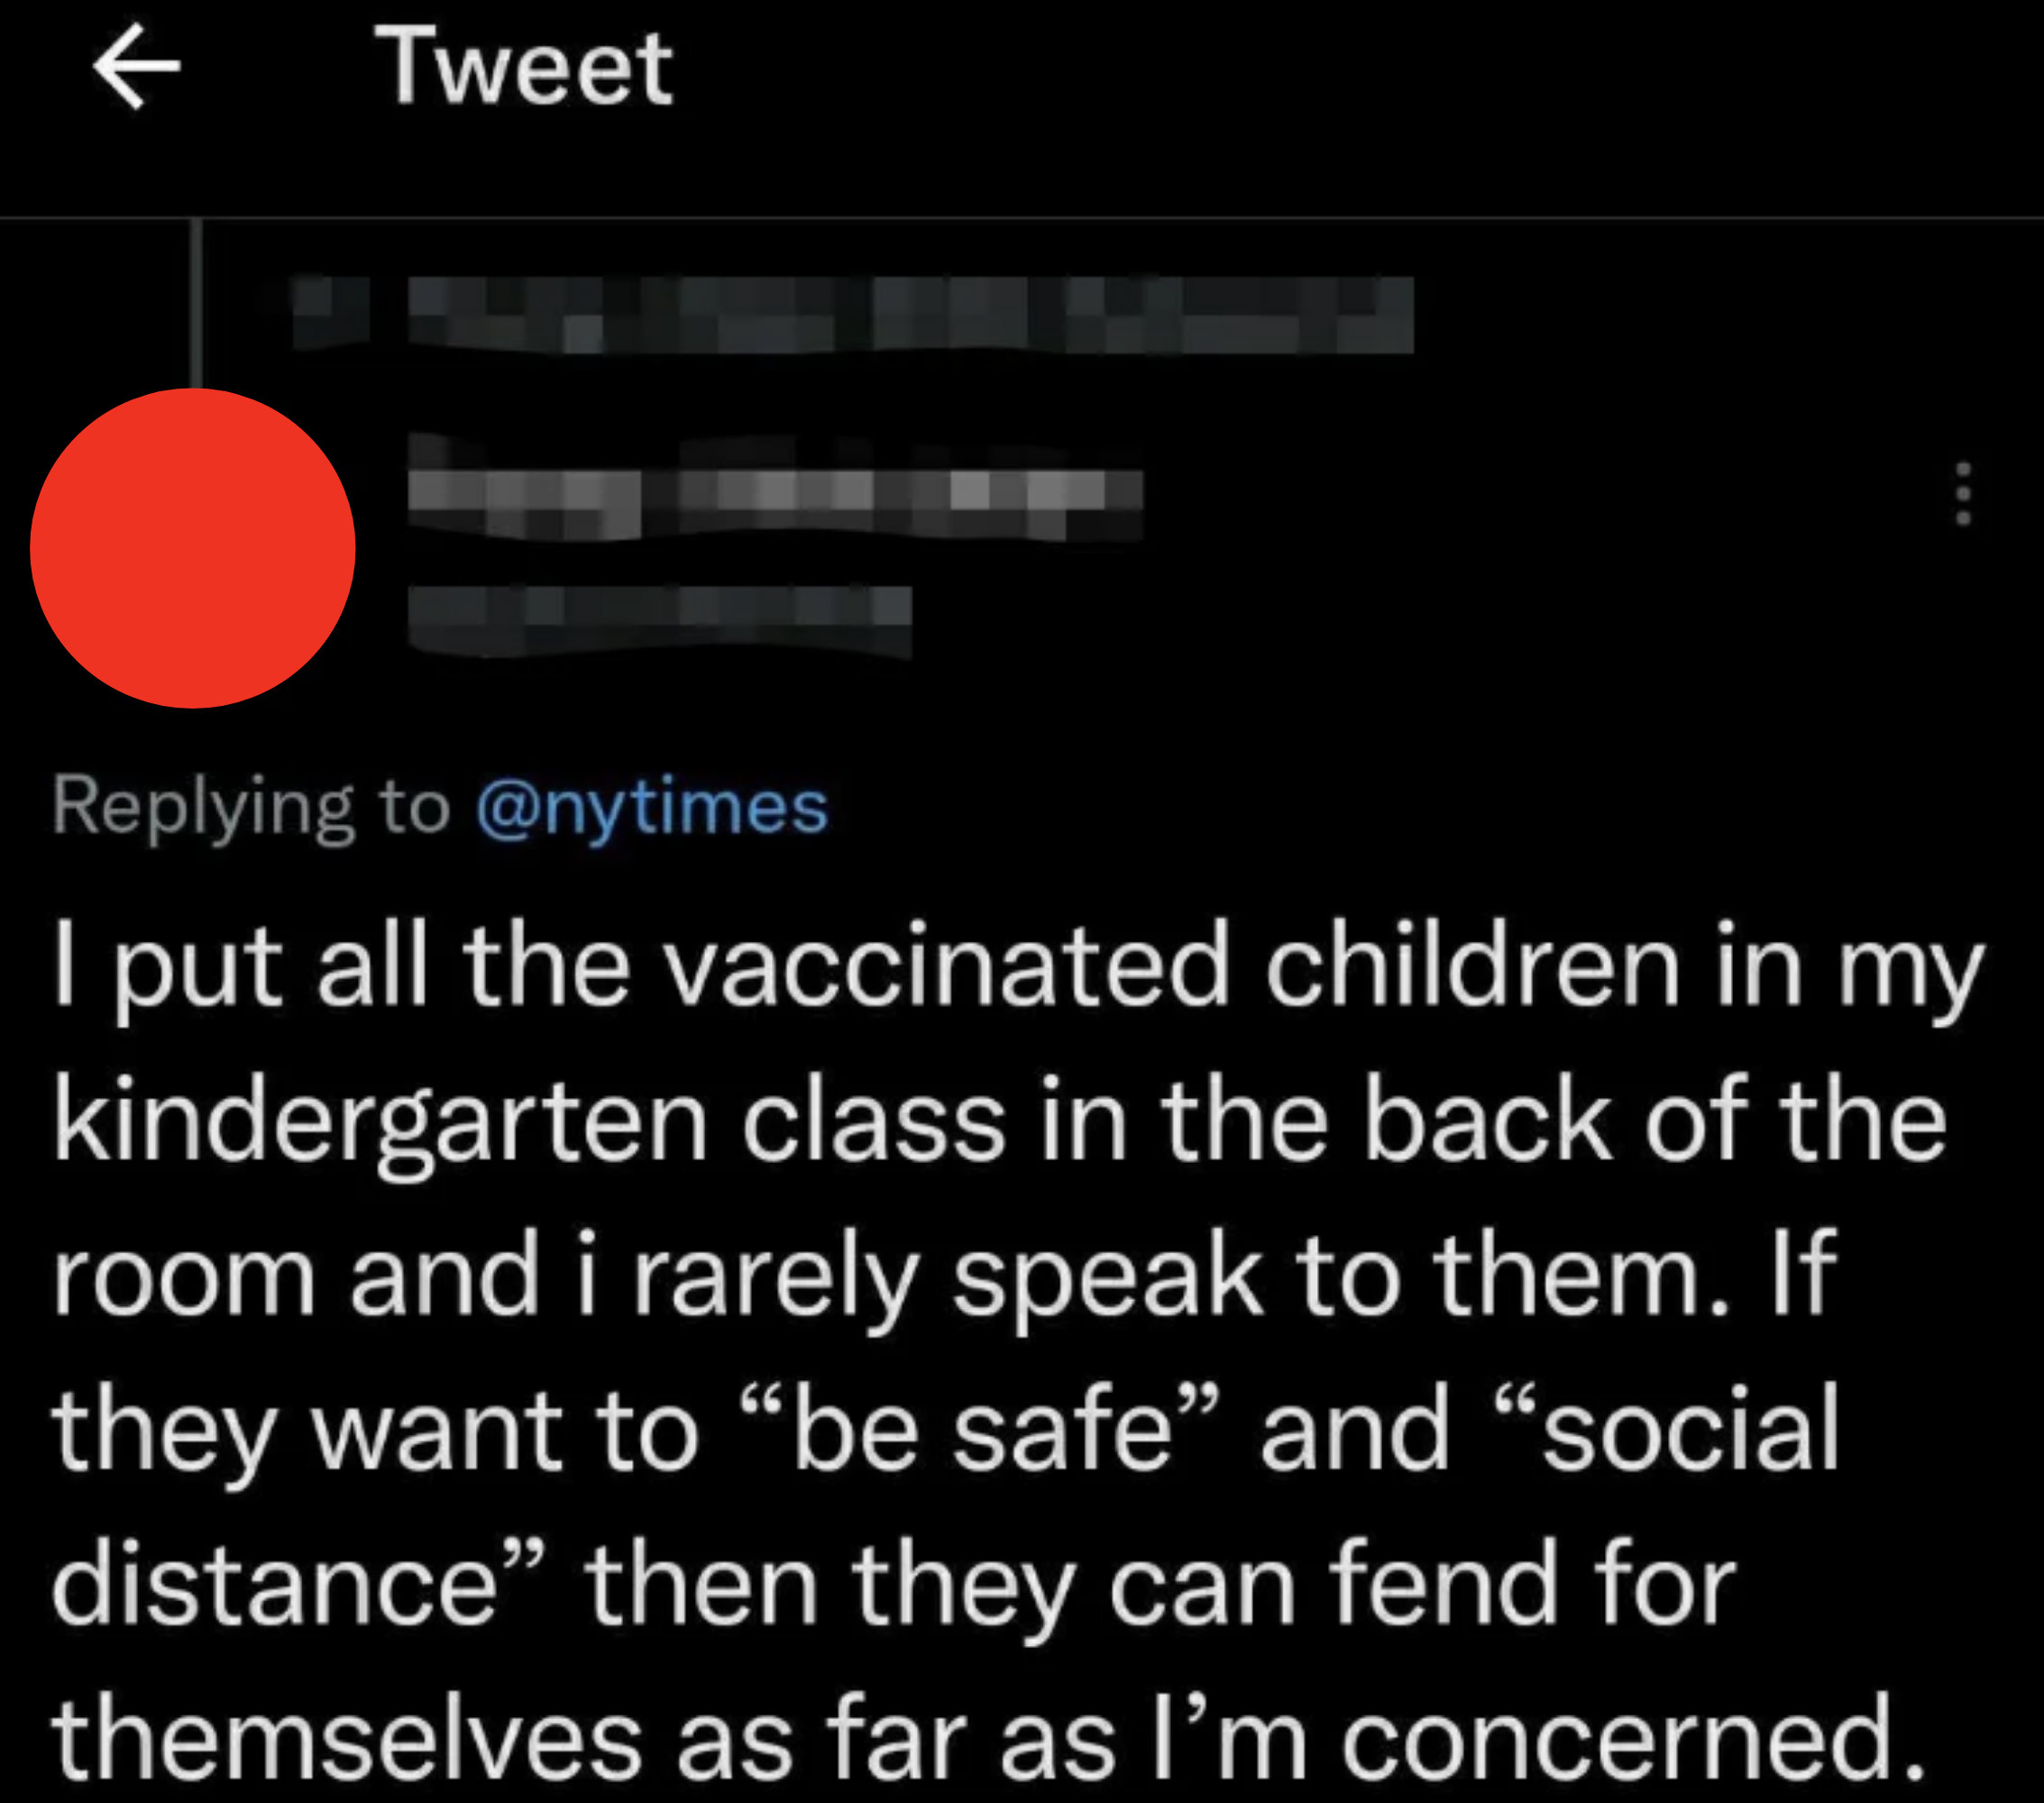 Teacher&#x27;s tweet: &quot;I put all the vaccinated children in my kindergarten class in the back of the room, and I rarely speak to them&quot;